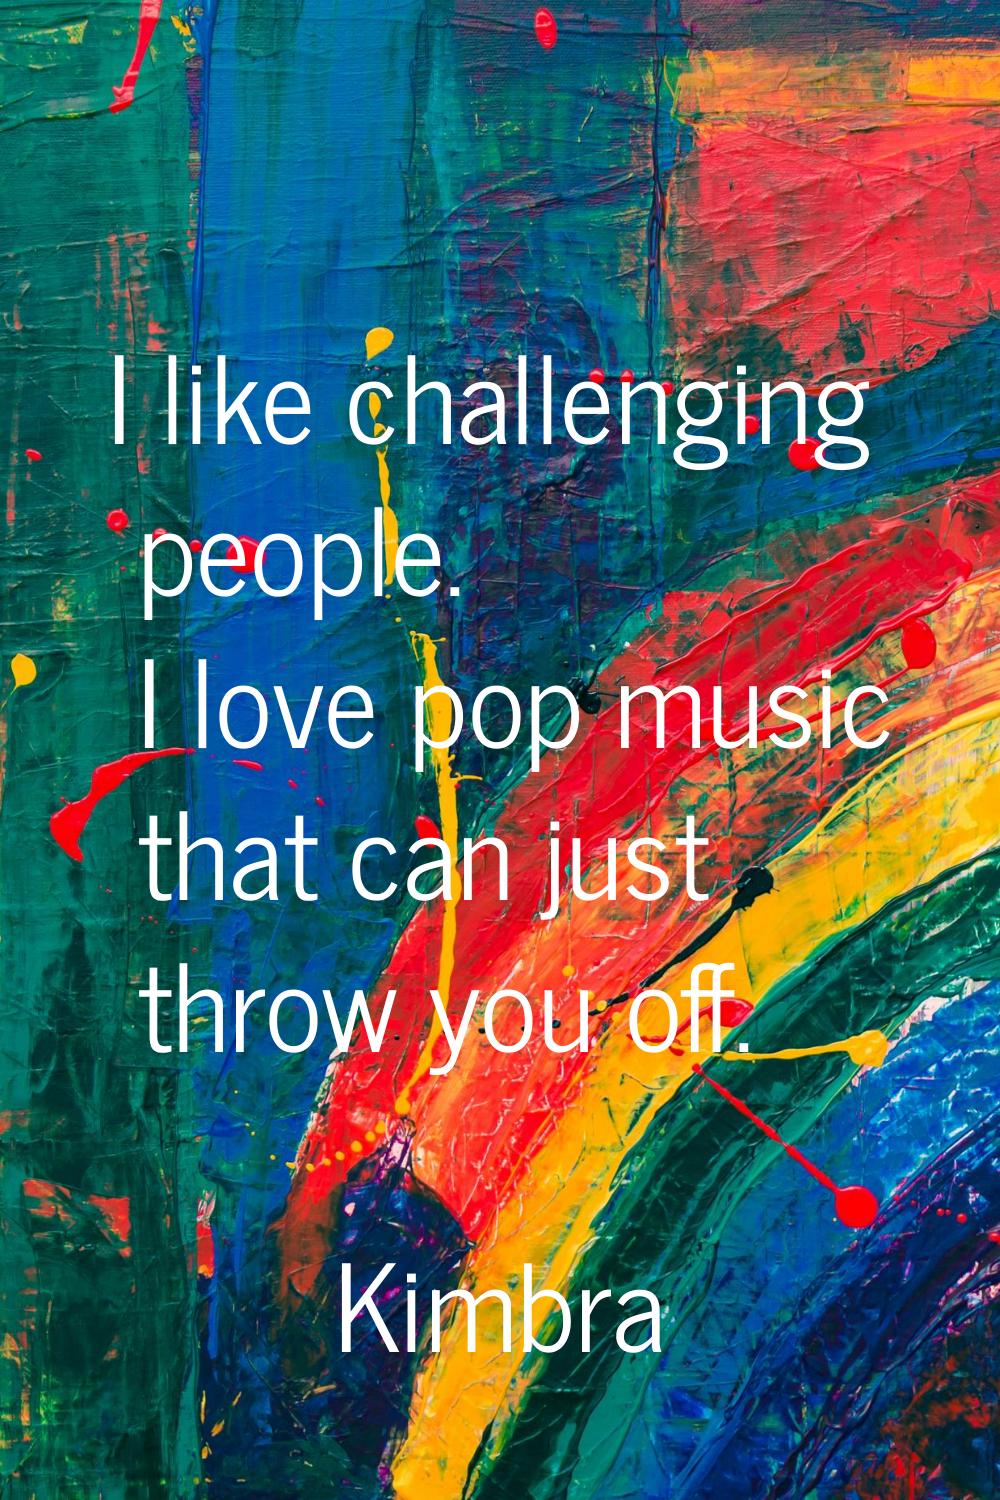 I like challenging people. I love pop music that can just throw you off.